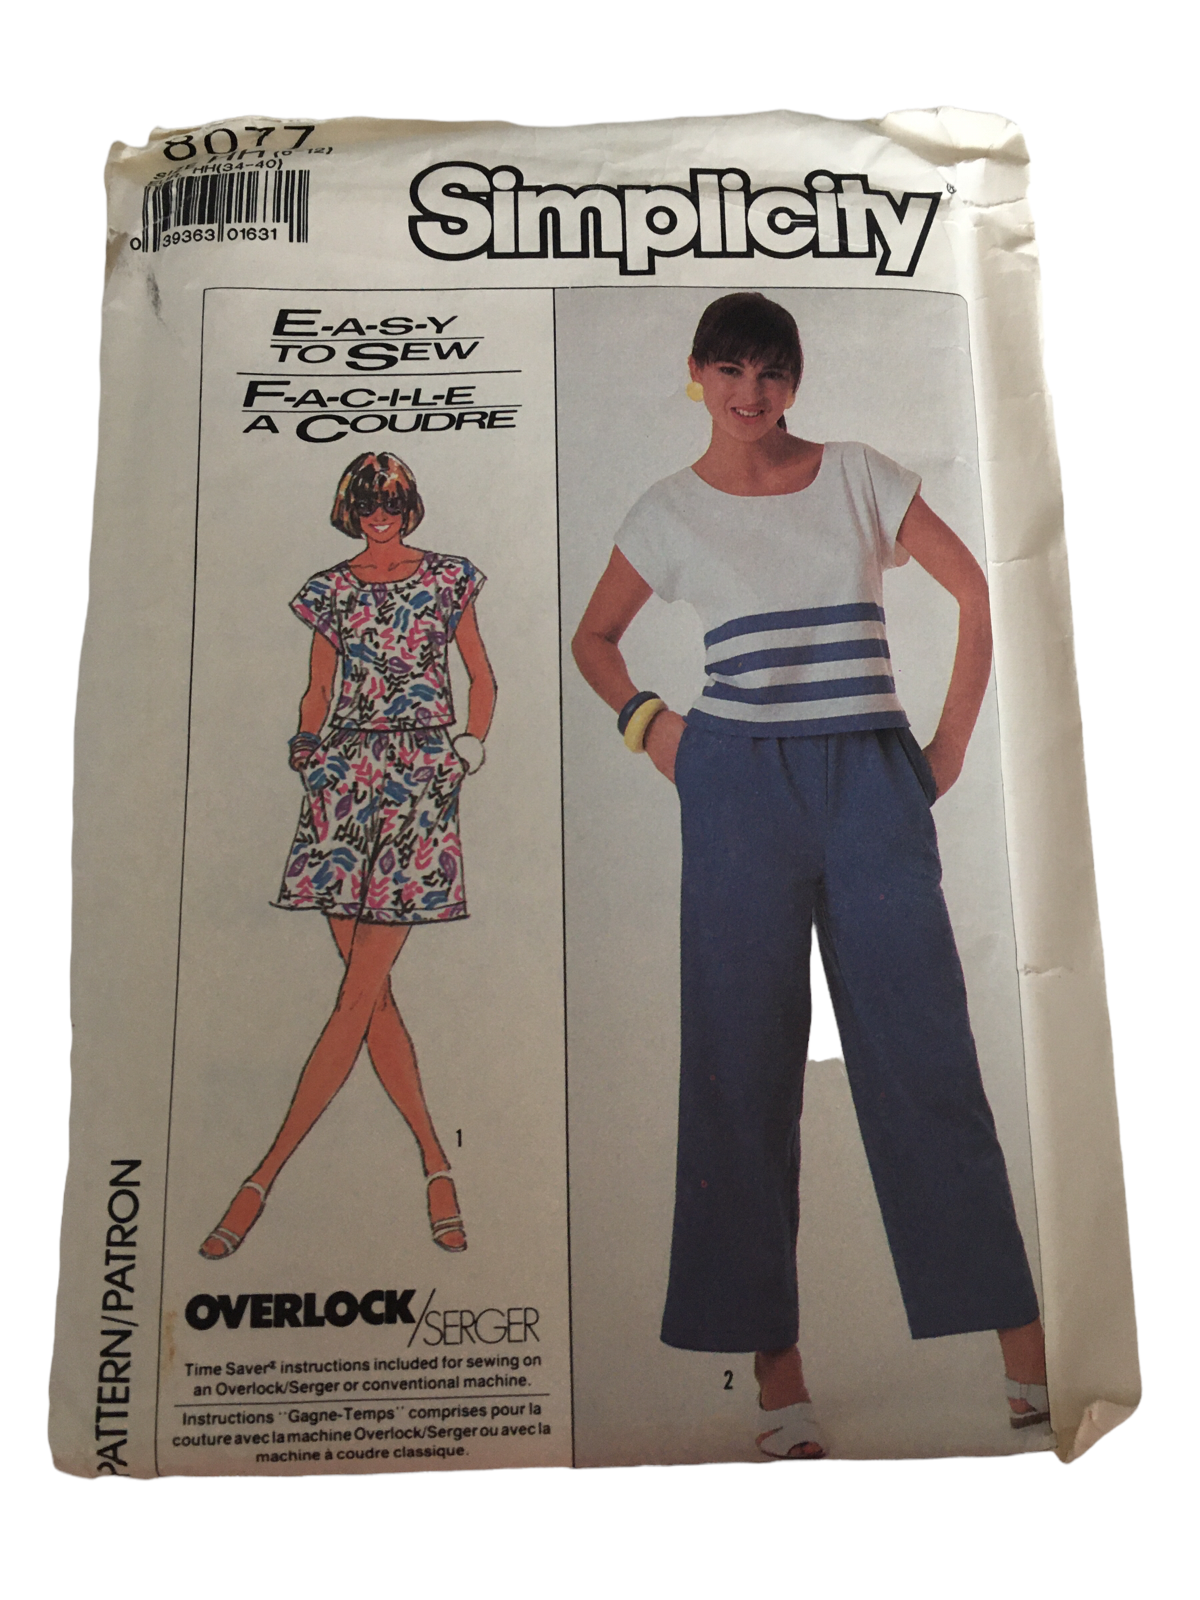 Simplicity Sewing Pattern 8077 Pants Shorts Cropped Top Scoop Neck UC 6 8 10 12 - $4.99